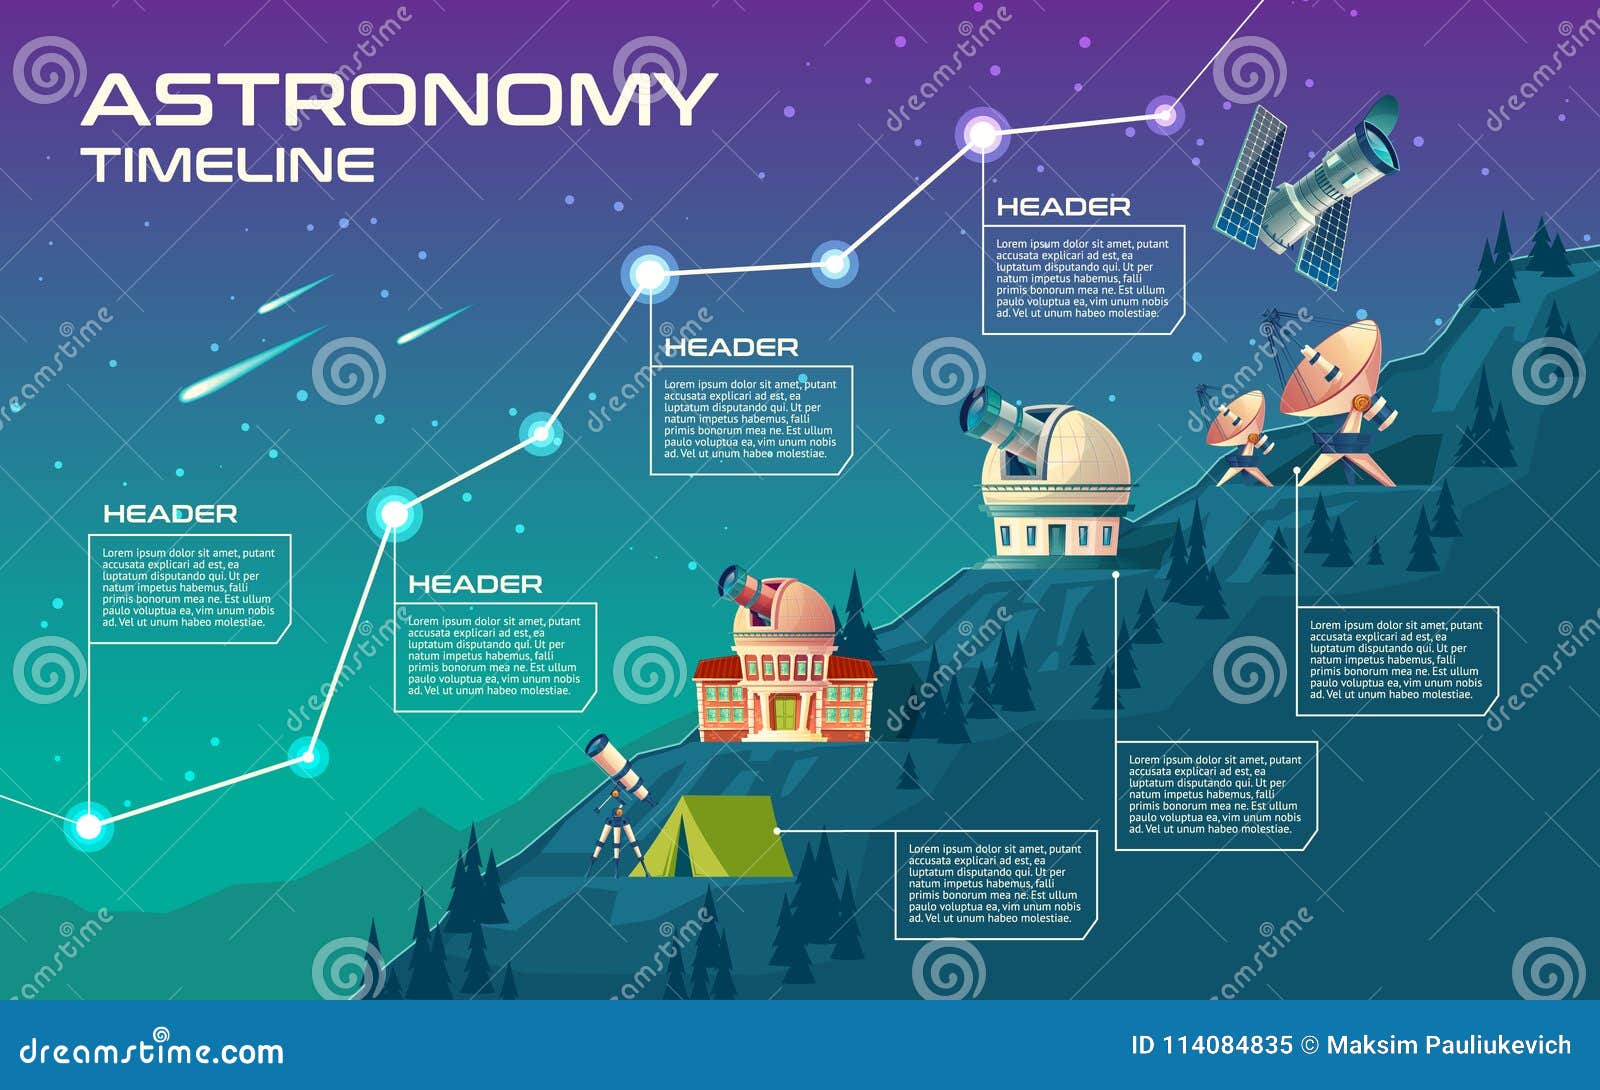  astronomy timeline, mock up for infographic